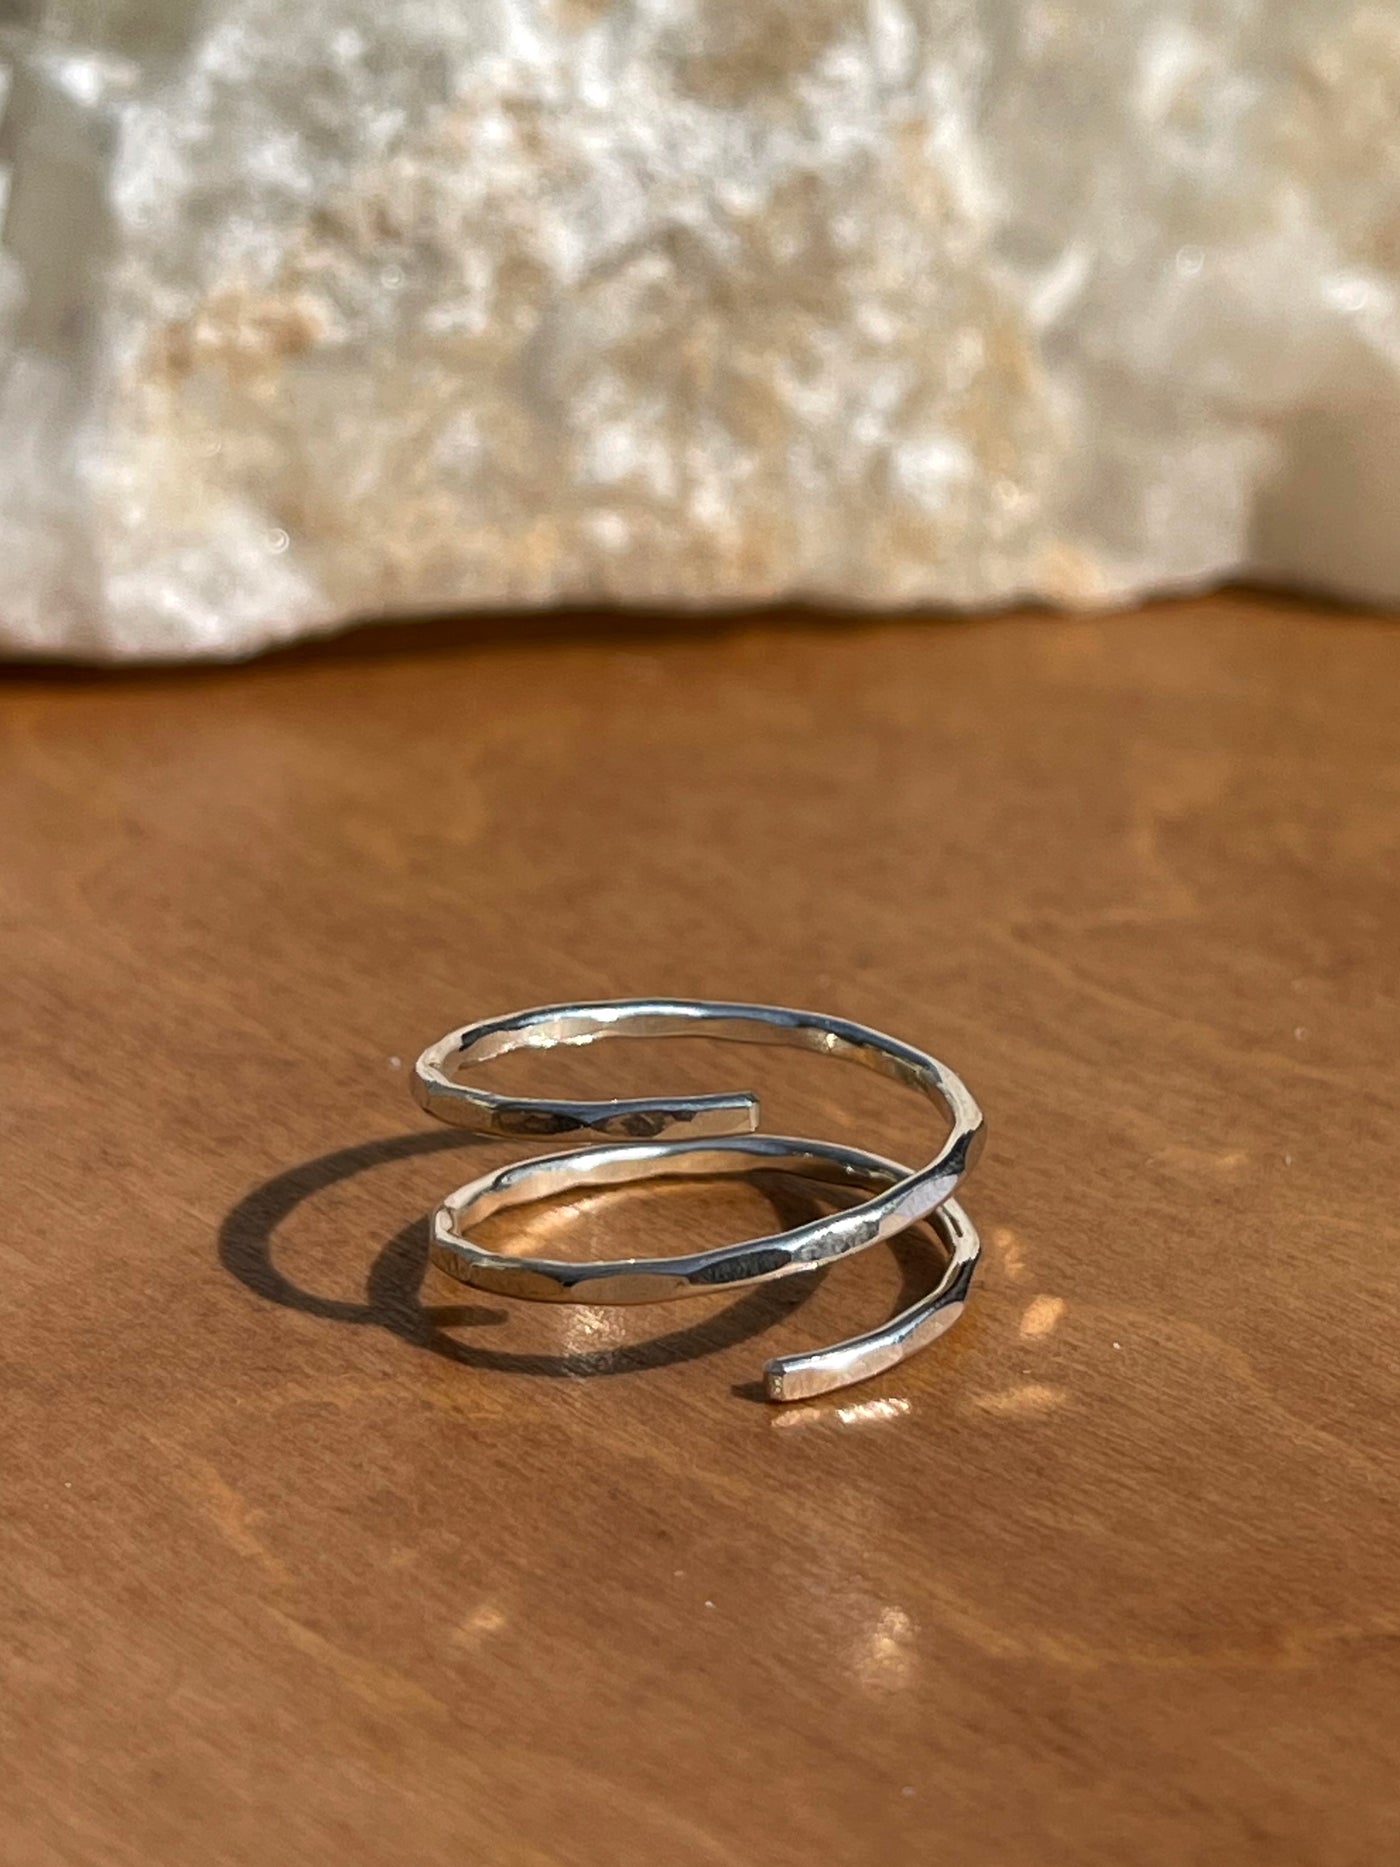 Silver Spiral Ring. This spiral ring is made from high quality sterling silver metal and great as a single standalone ring or as a stacker. Size 6-7.